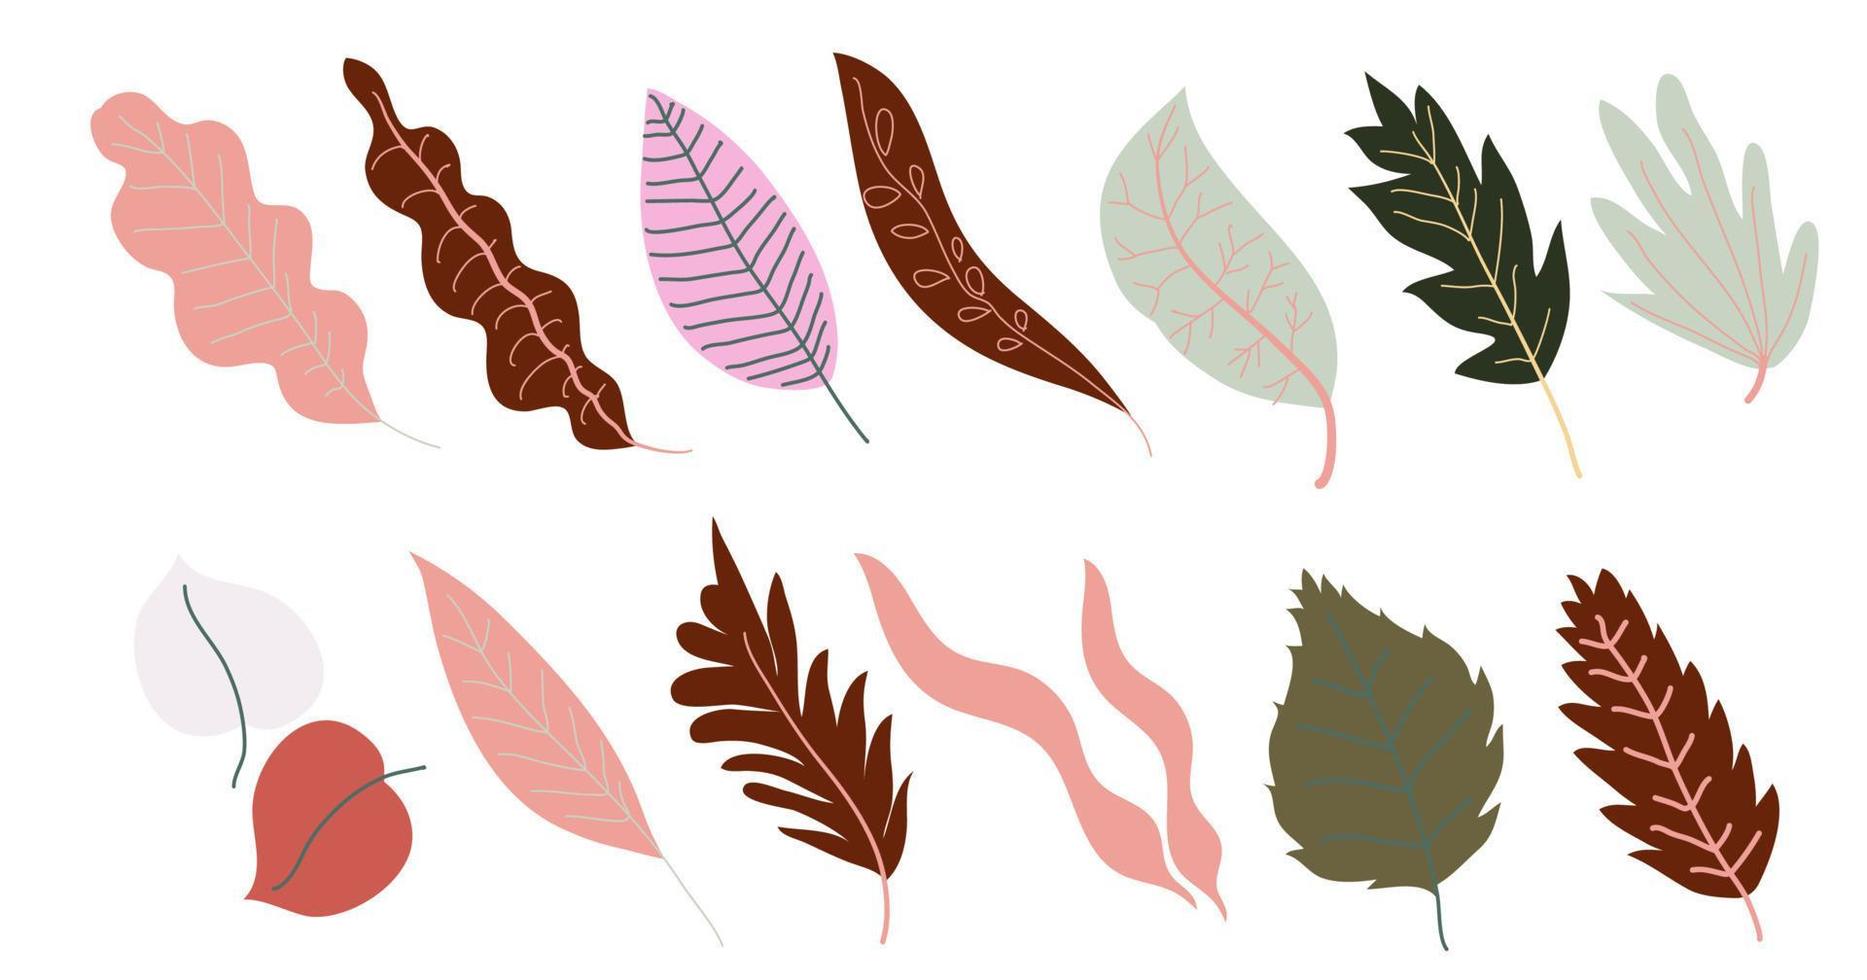 Autumn leaves, foliage and branches leafage vector